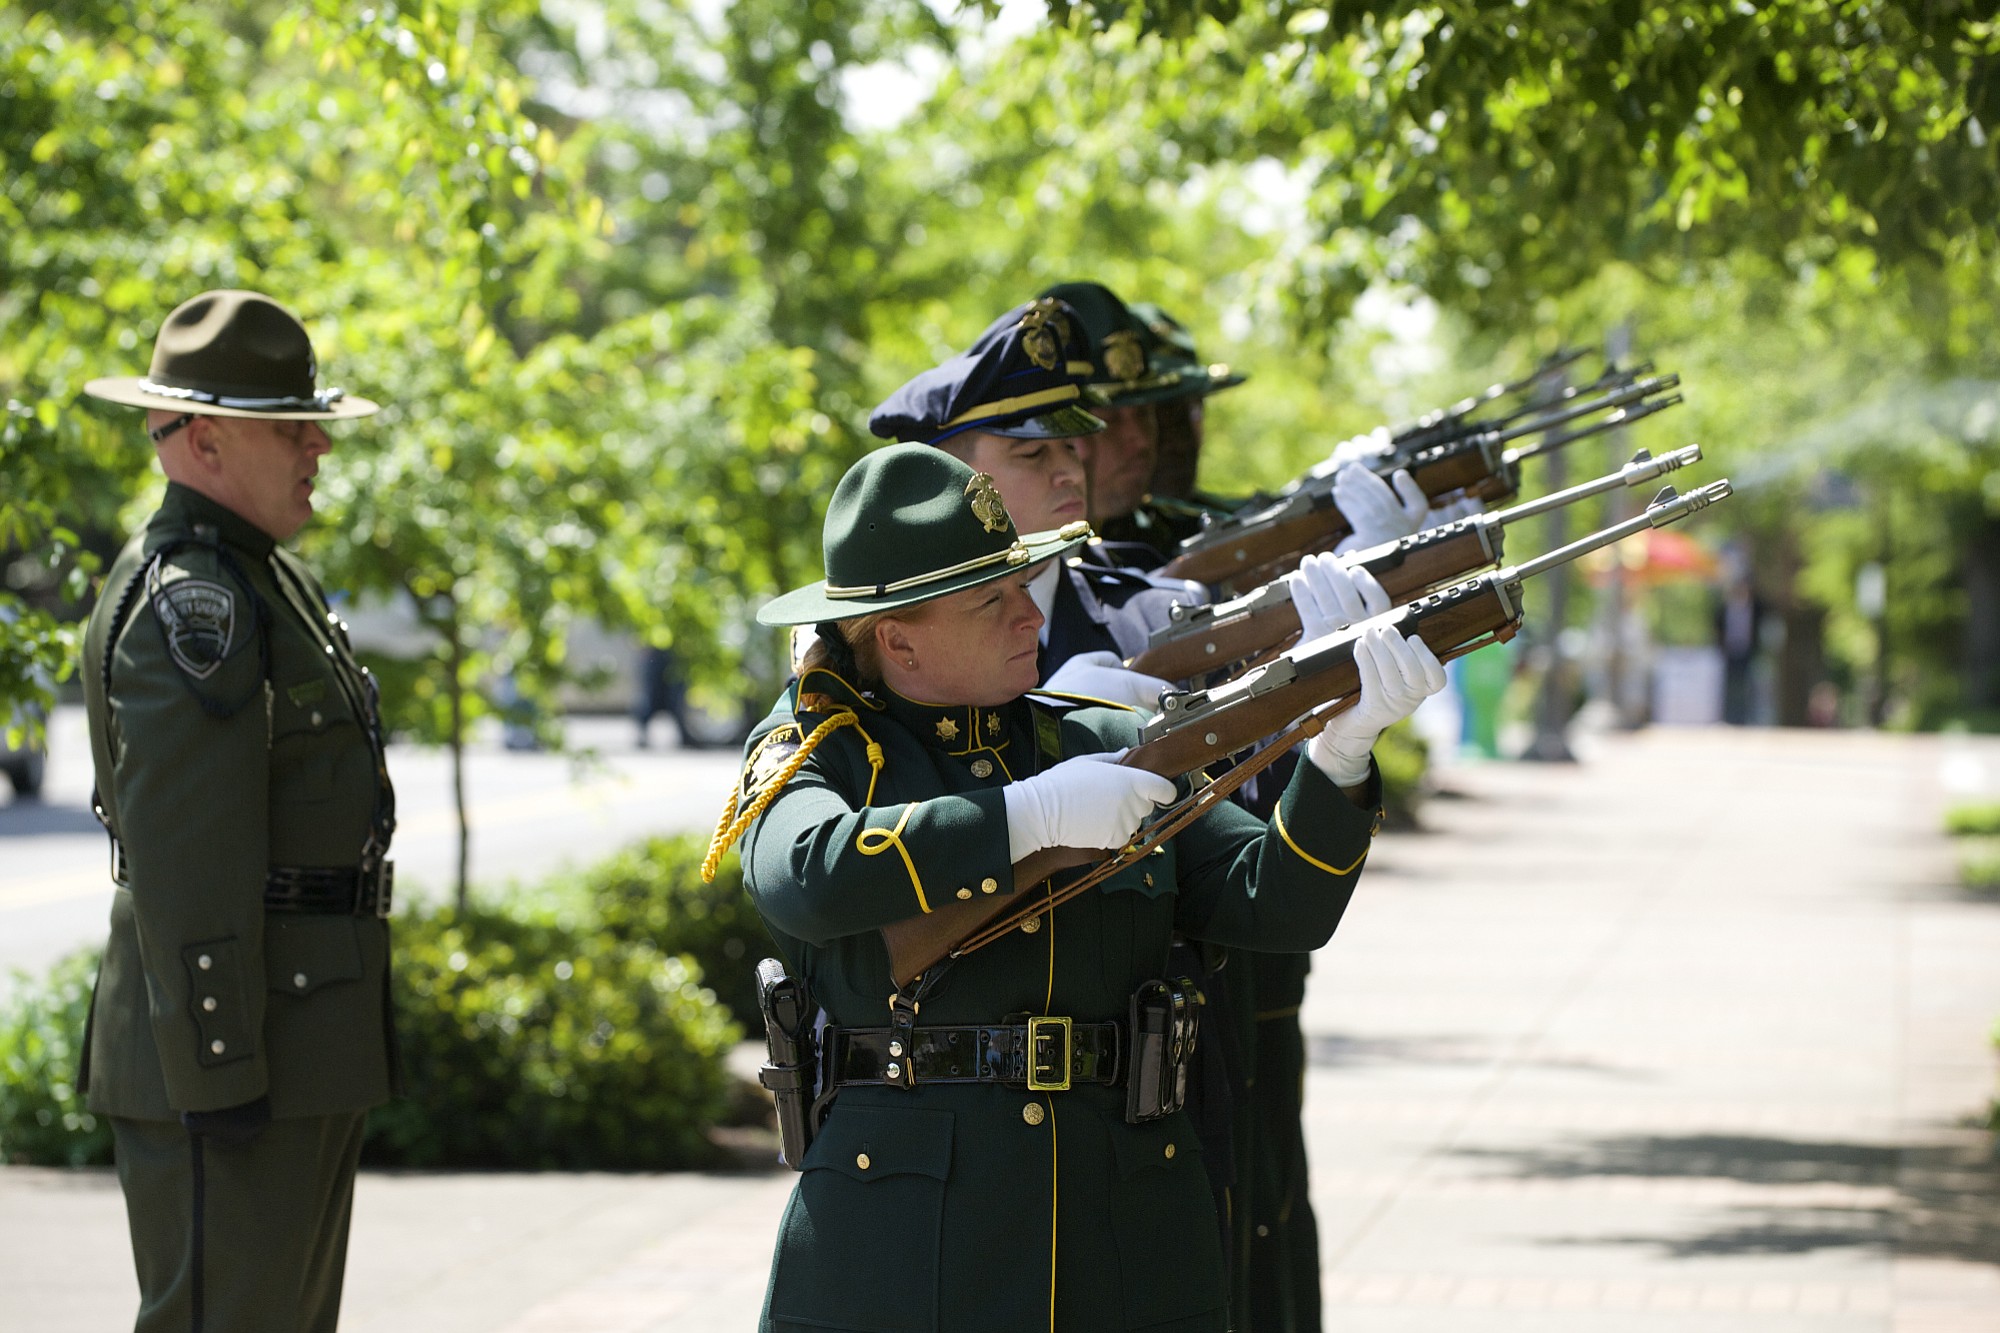 Photos by Steven Lane/The Columbian
A multi-agency honor guard fires the 21-gun salute Thursday morning at the 2015 Annual Law Enforcement Memorial Ceremony.